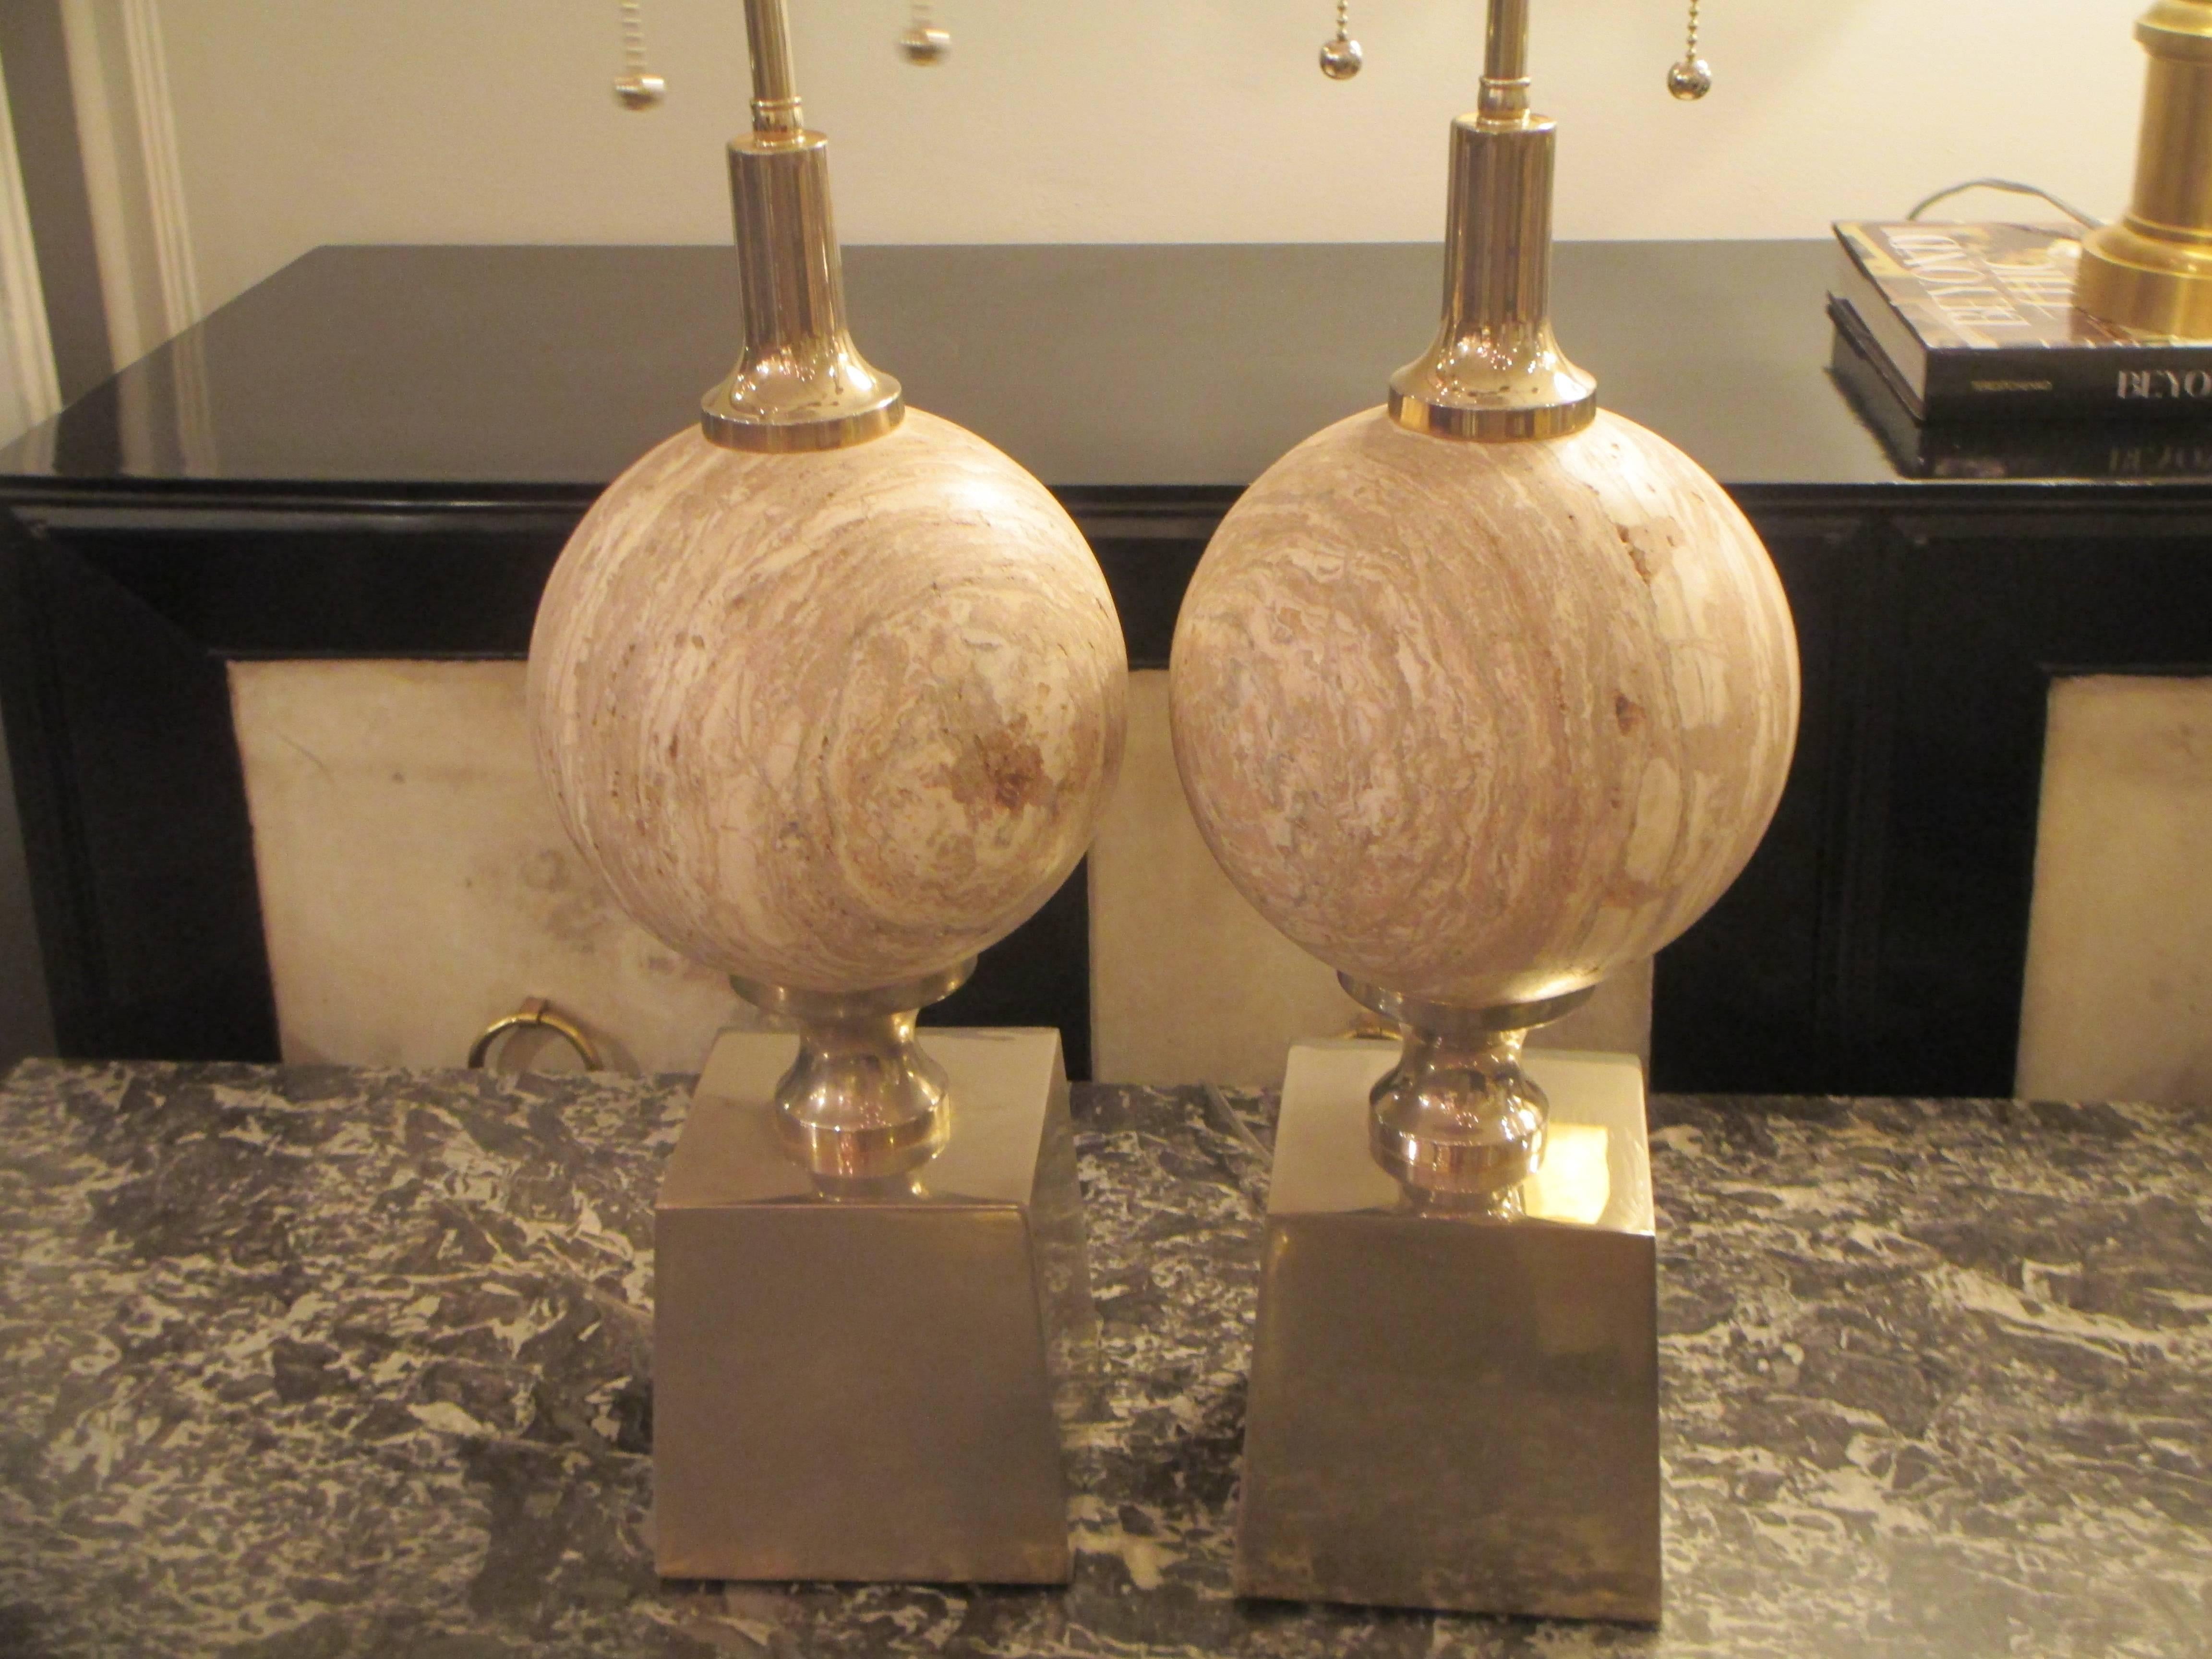 A sculptural pair of travertine lamps on chrome-plated plinth bases.